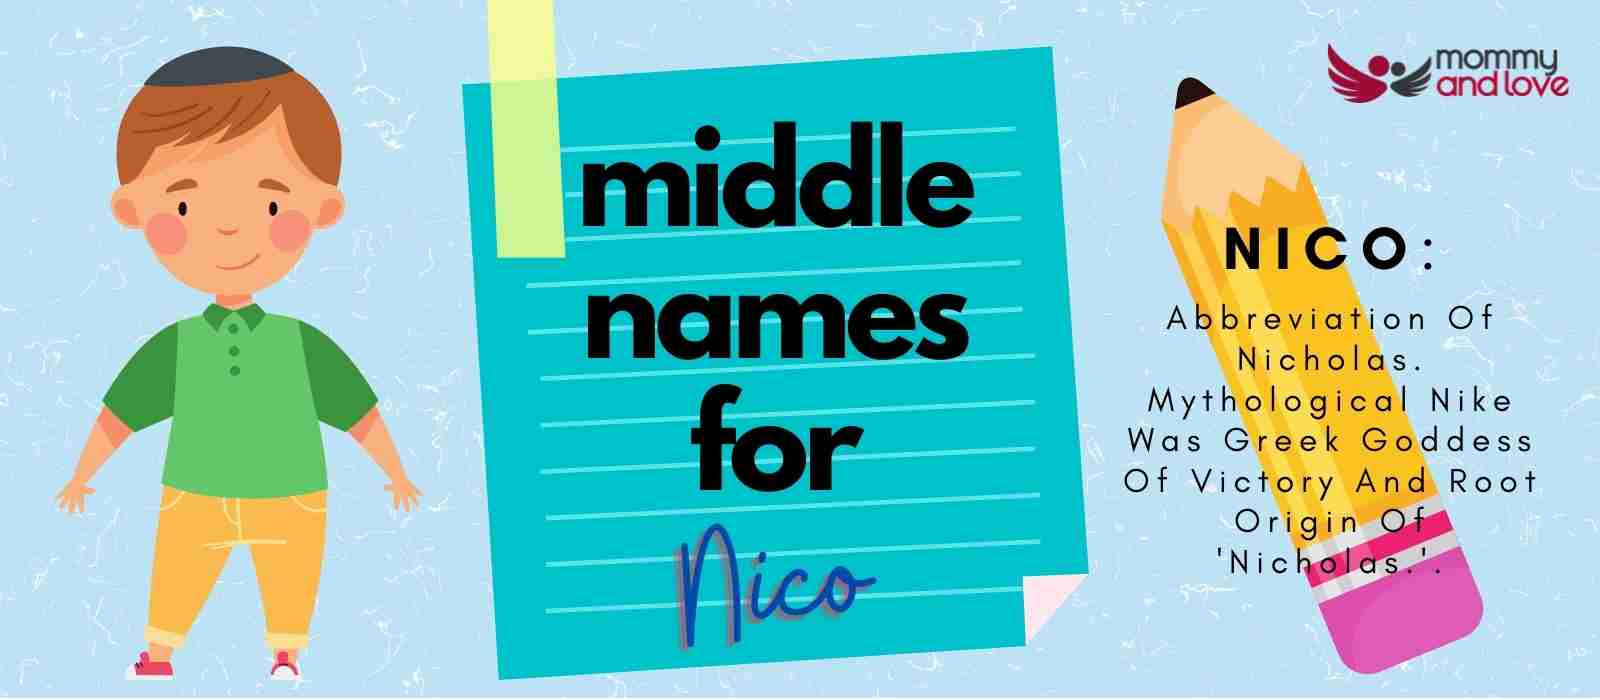 Middle Names for Nico